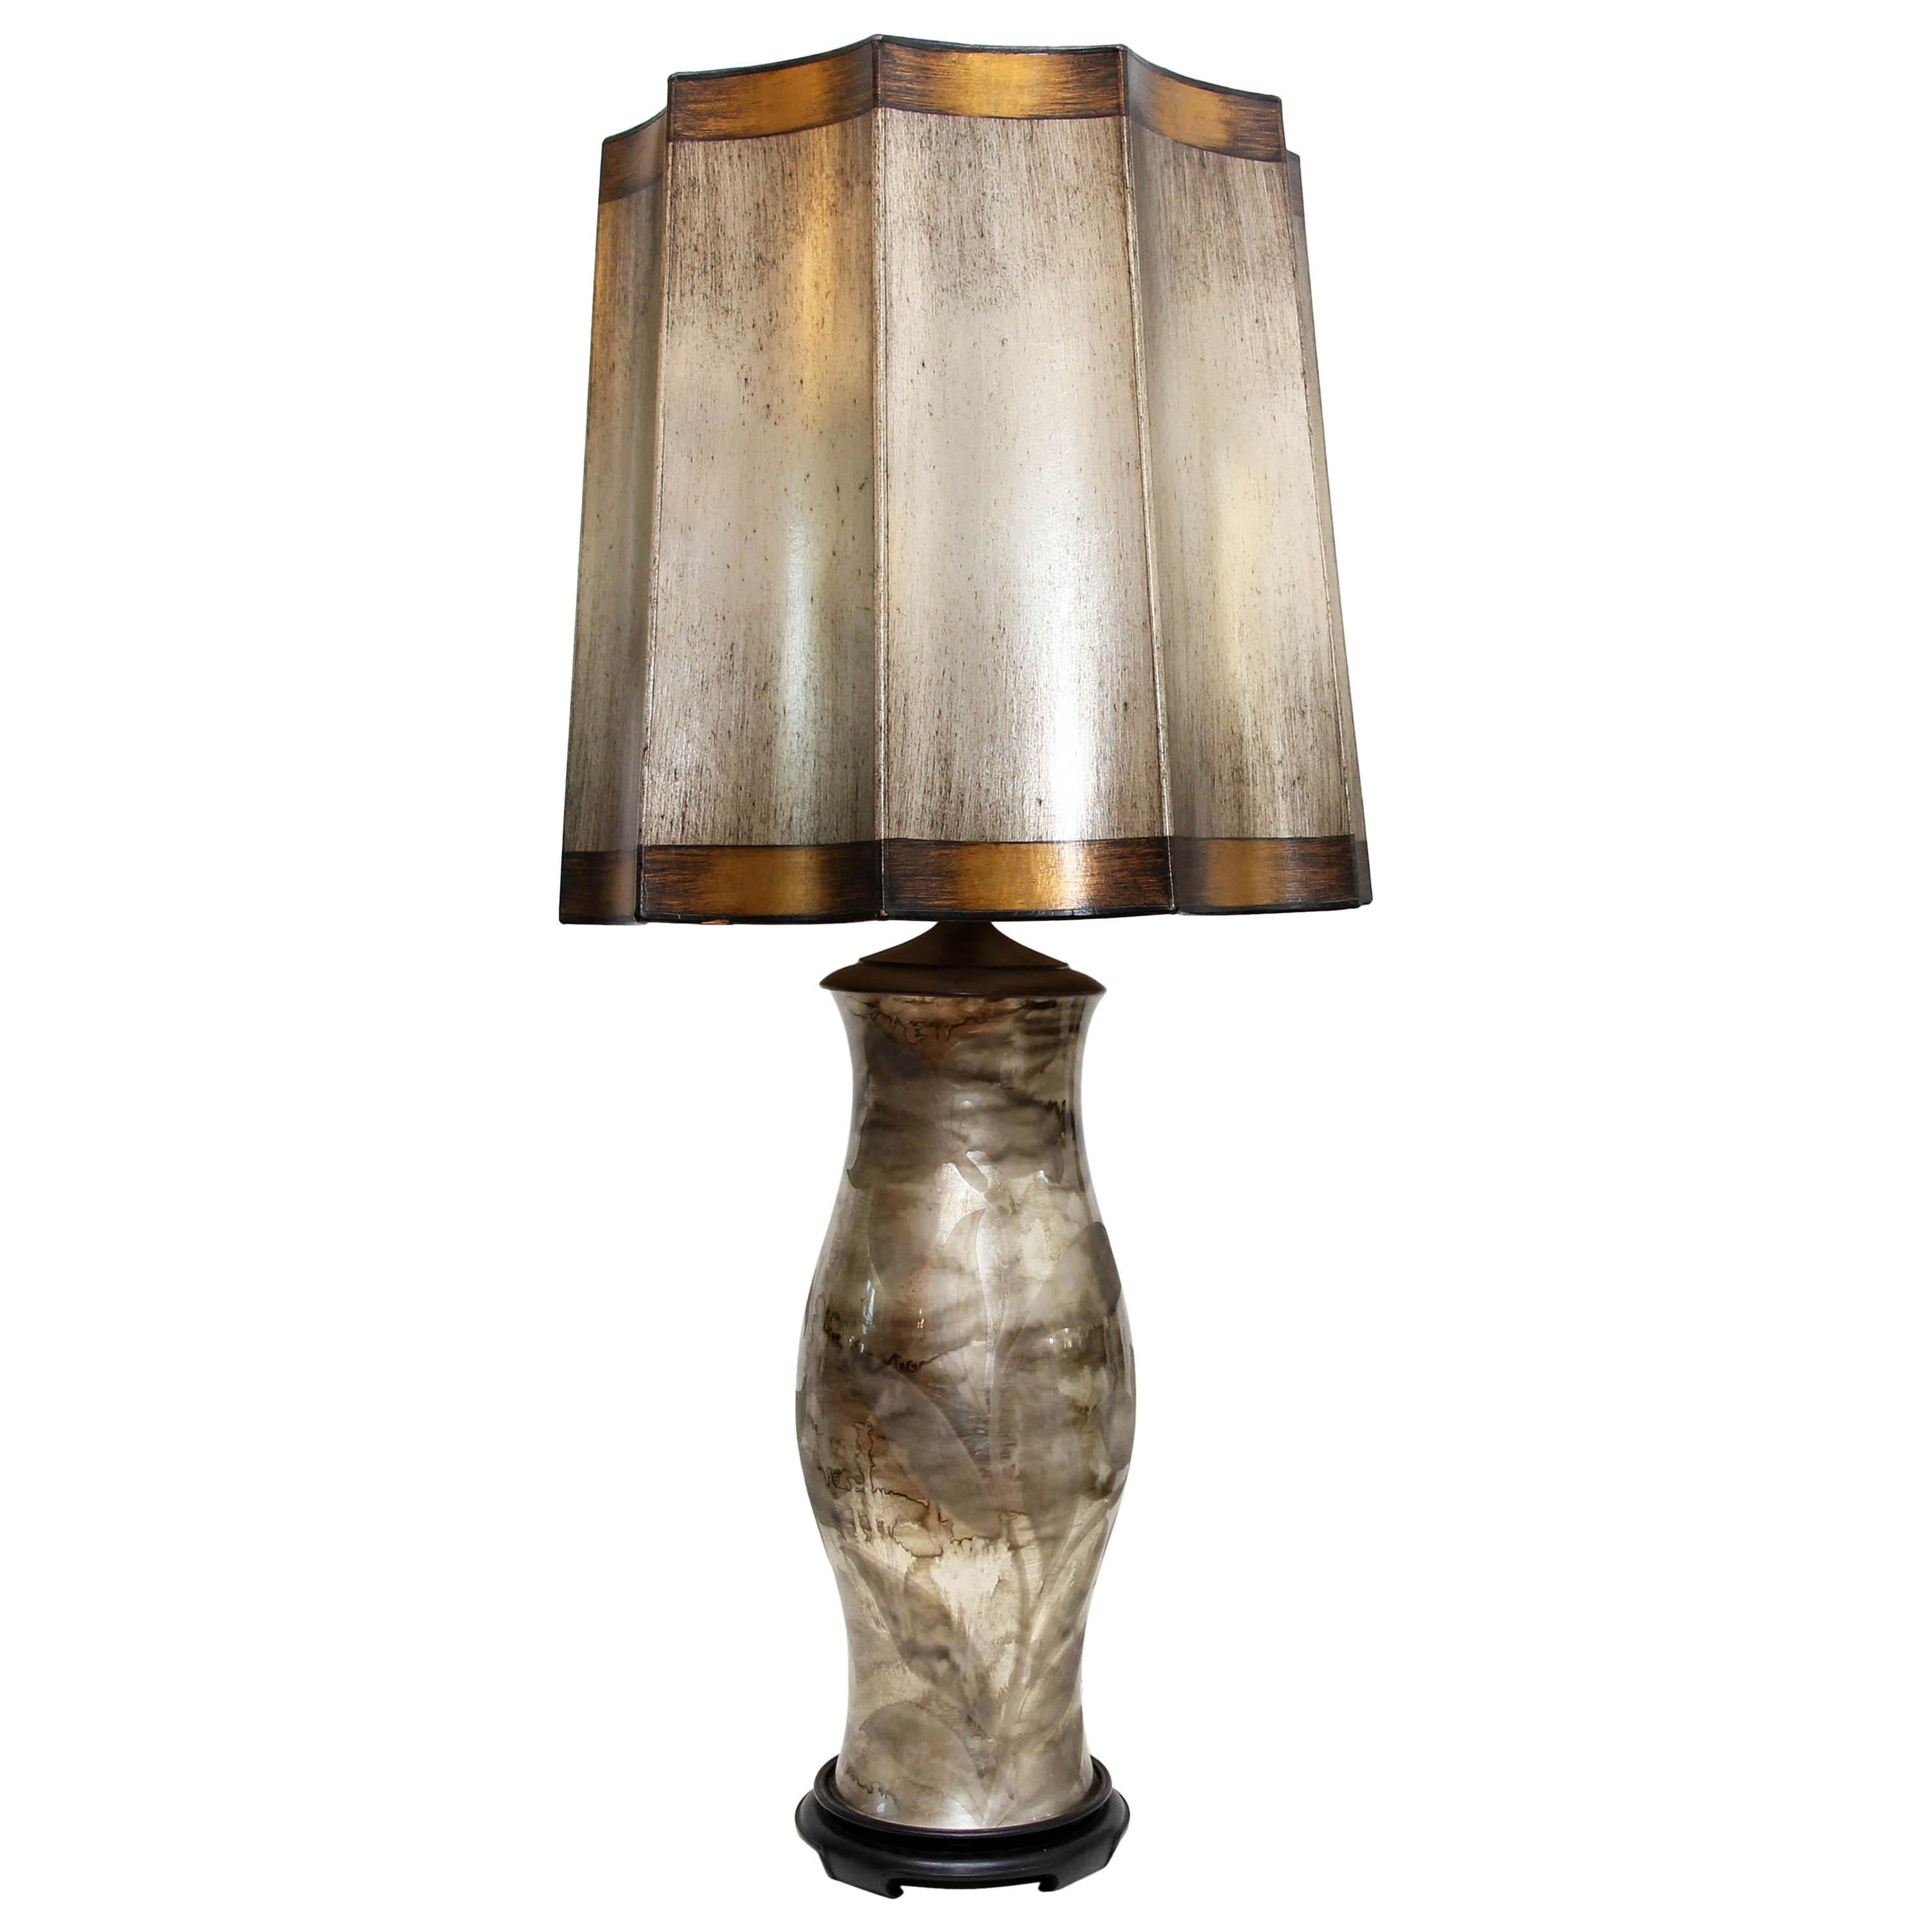 Pair of unique Mid-Century Modern lamps. Gilt and painted original shades. Glass bases with silver gilding on interior. Exterior of glass is etched with floral design.